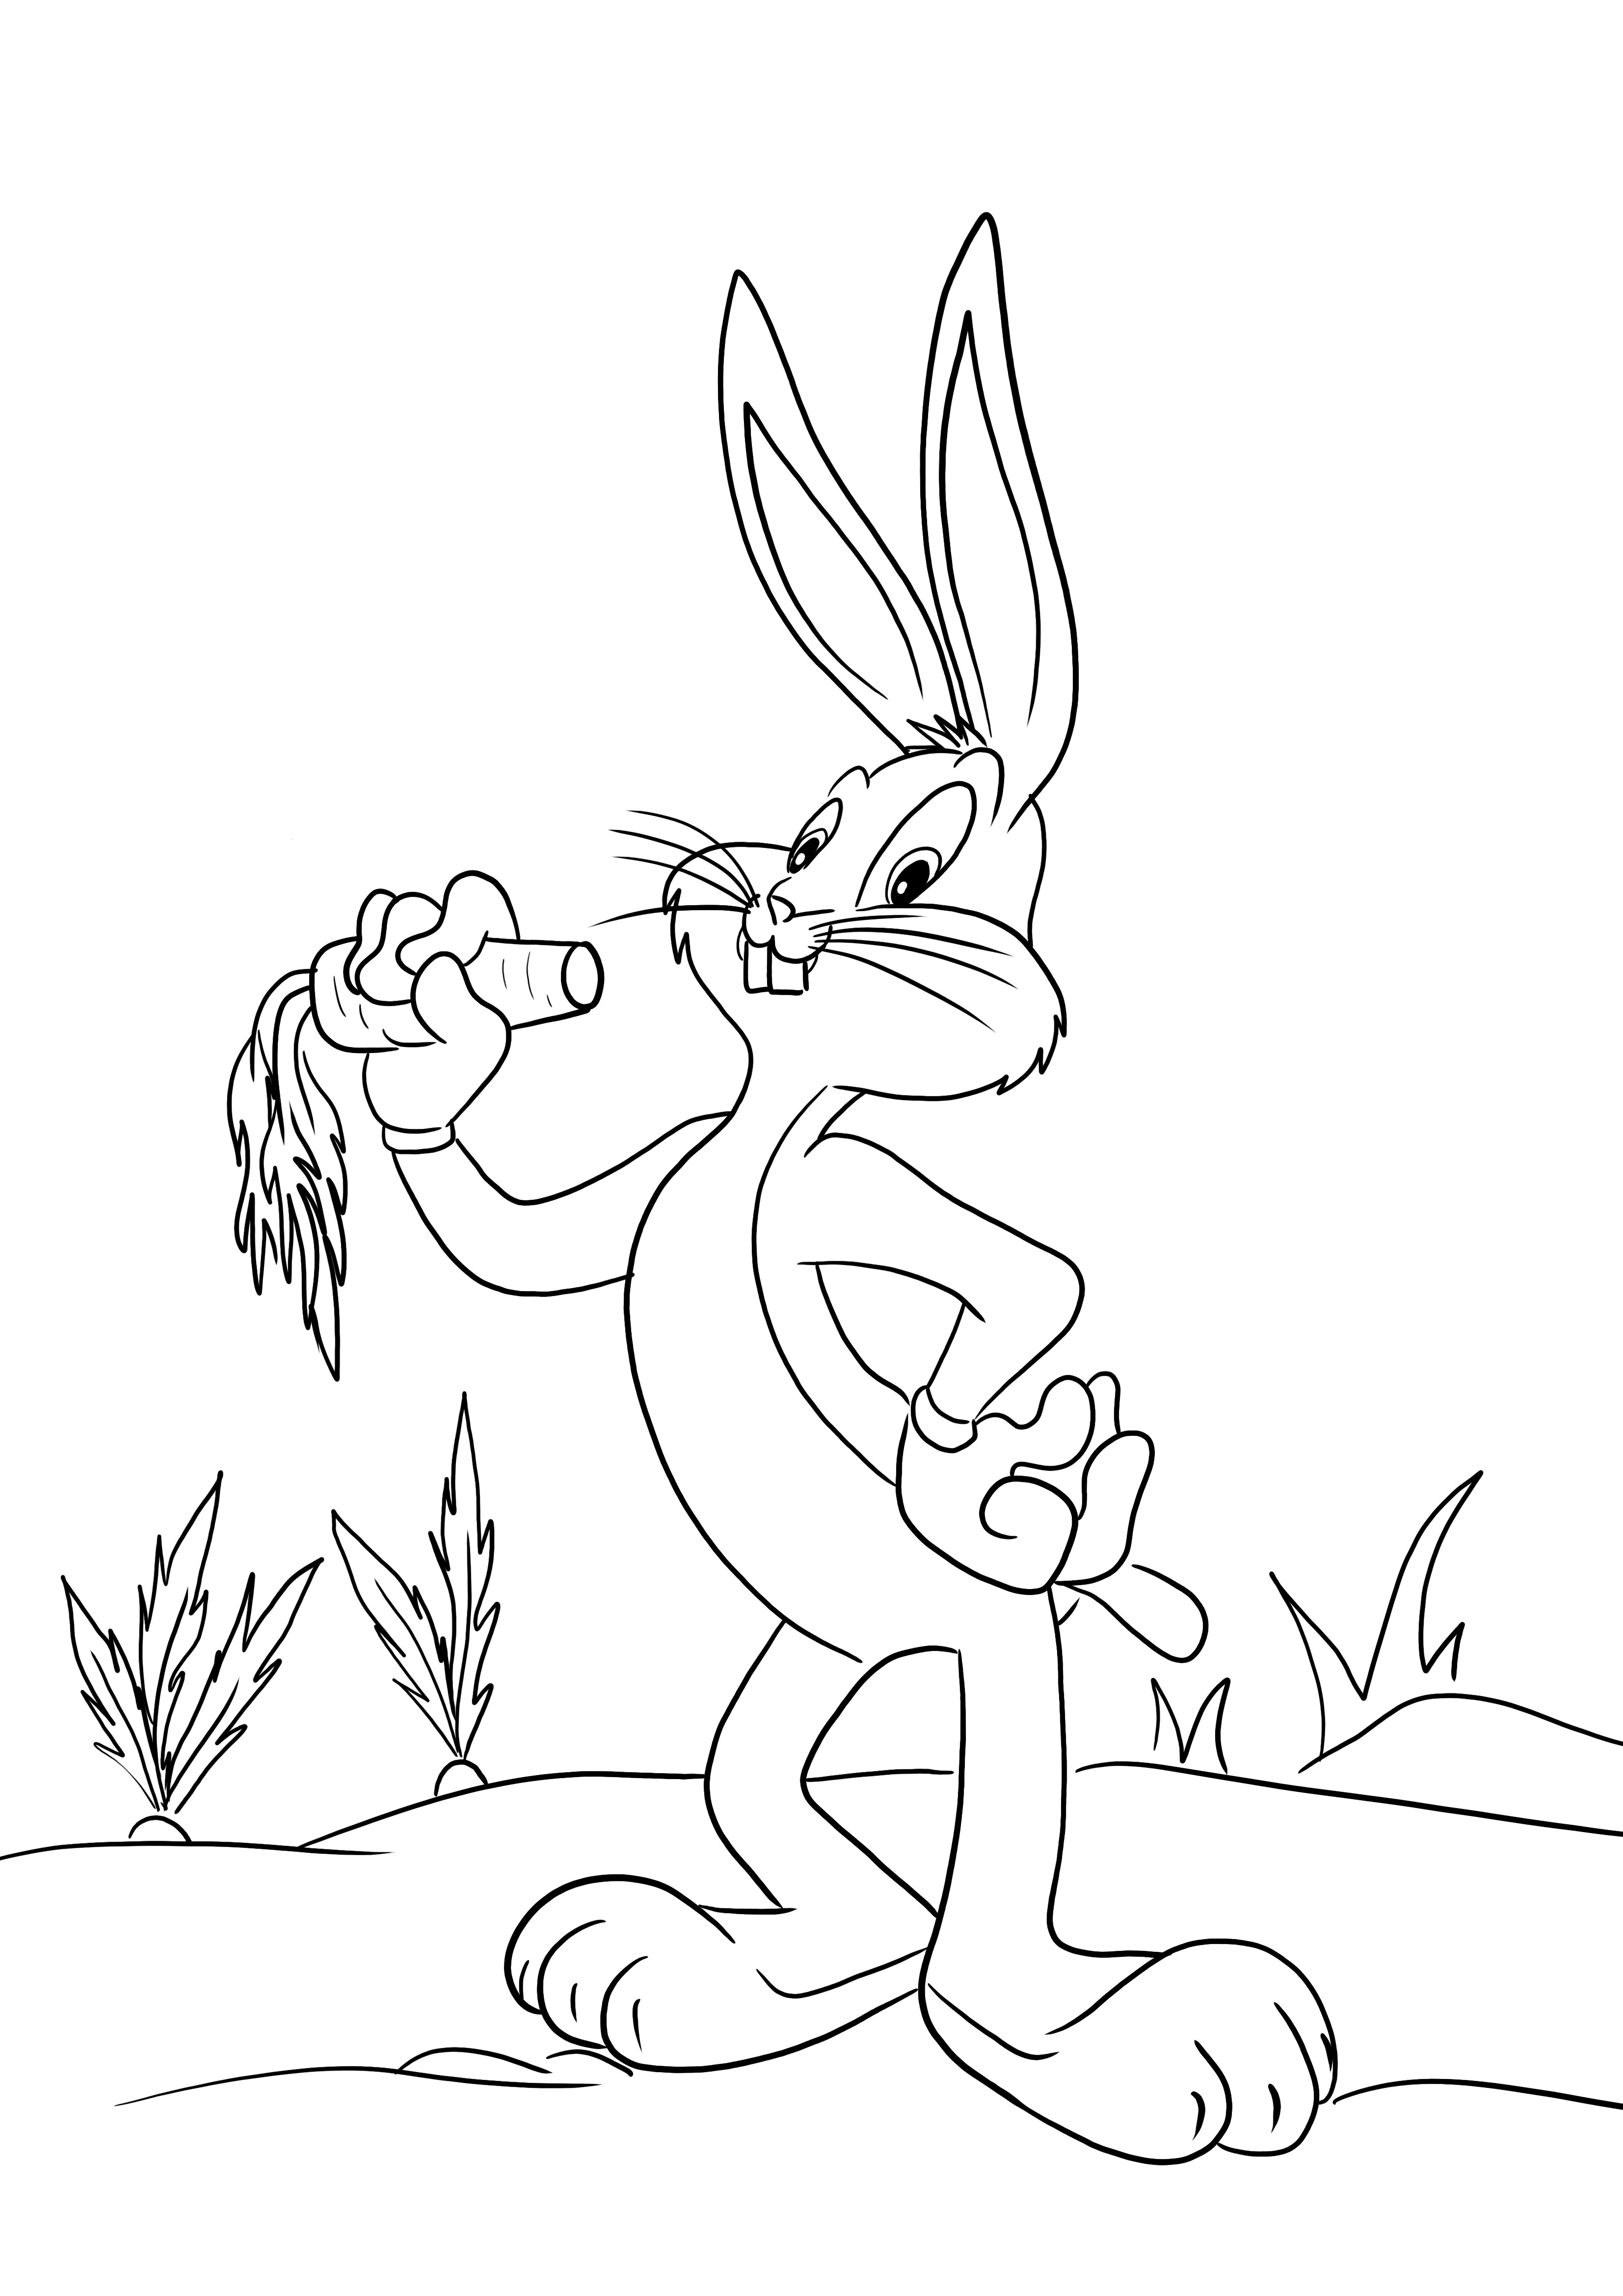 Easy coloring picture of Bugs Bunny for kids to color and have fun